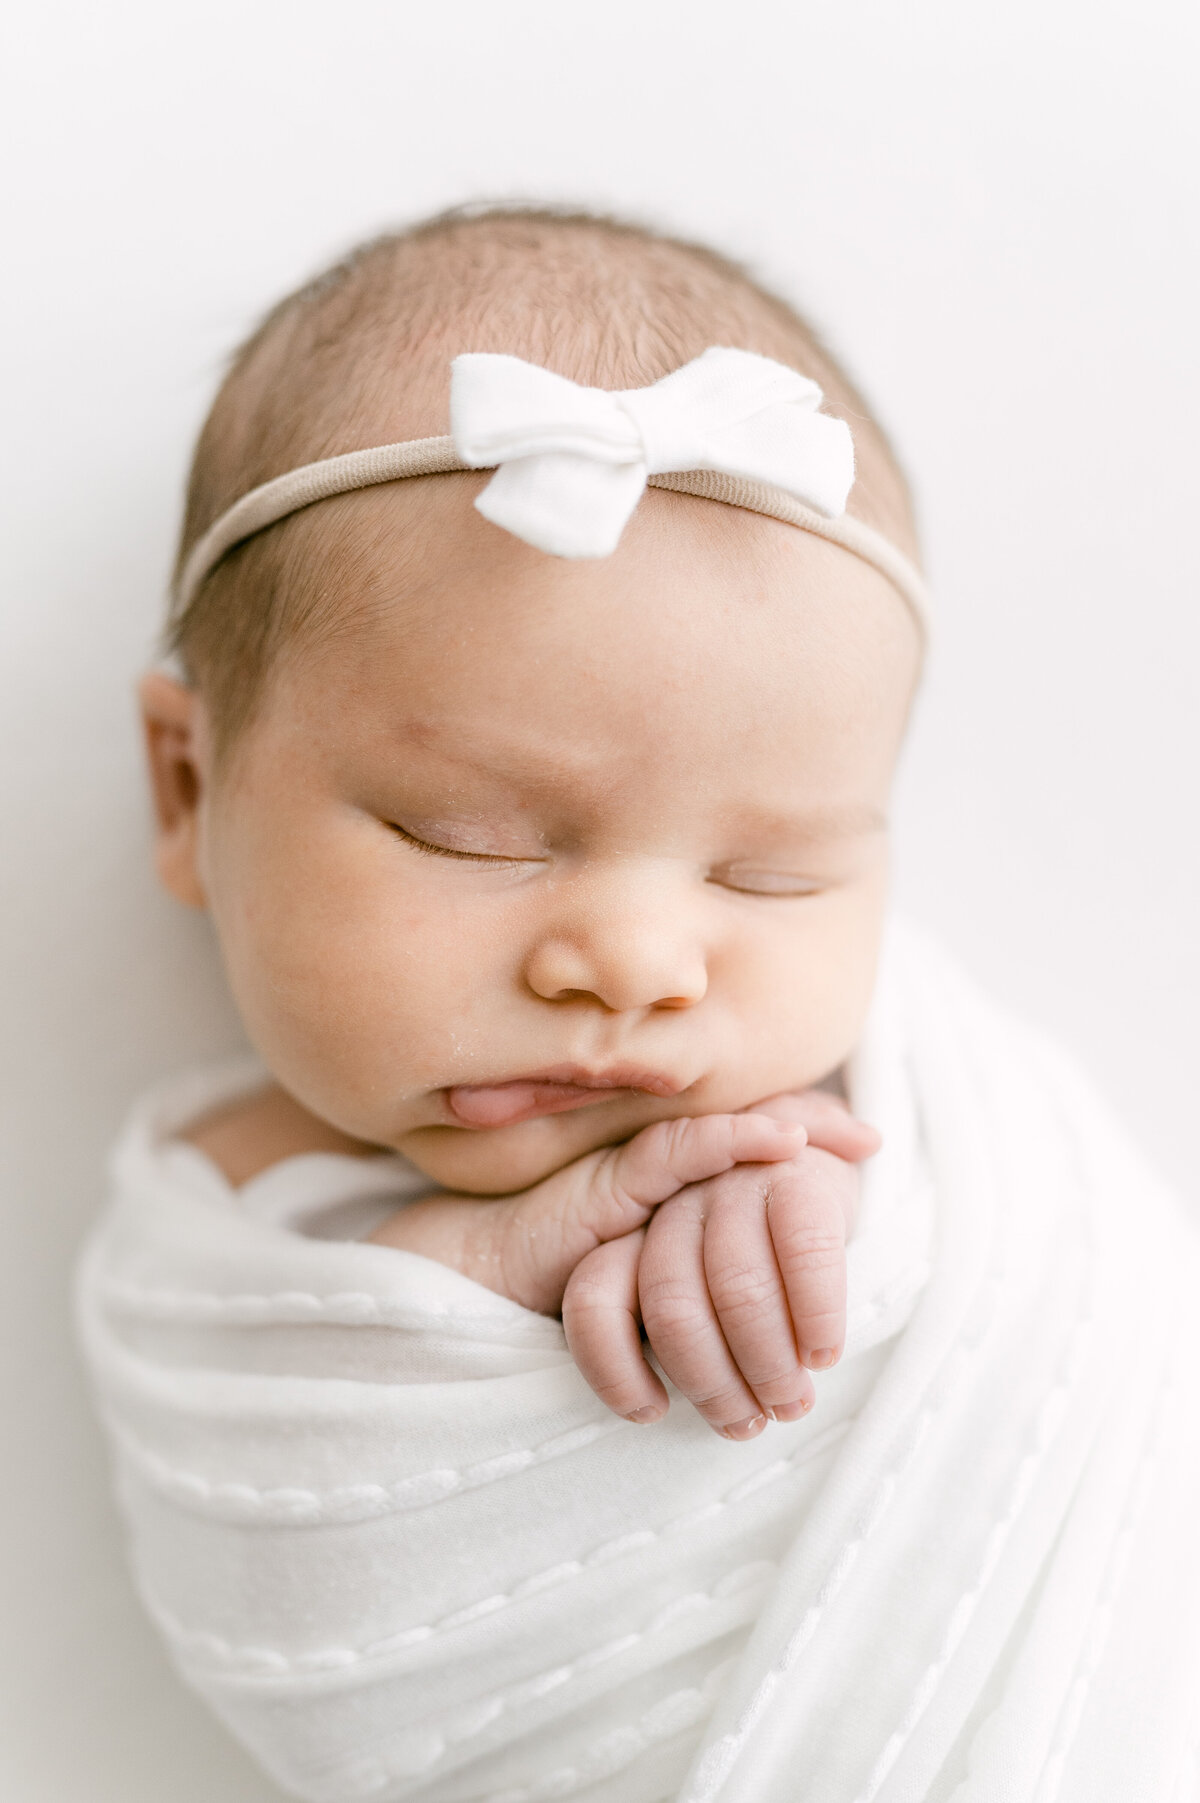 Close up photograph of a baby with a white bow and a white swaddle, hands out and under her chin.